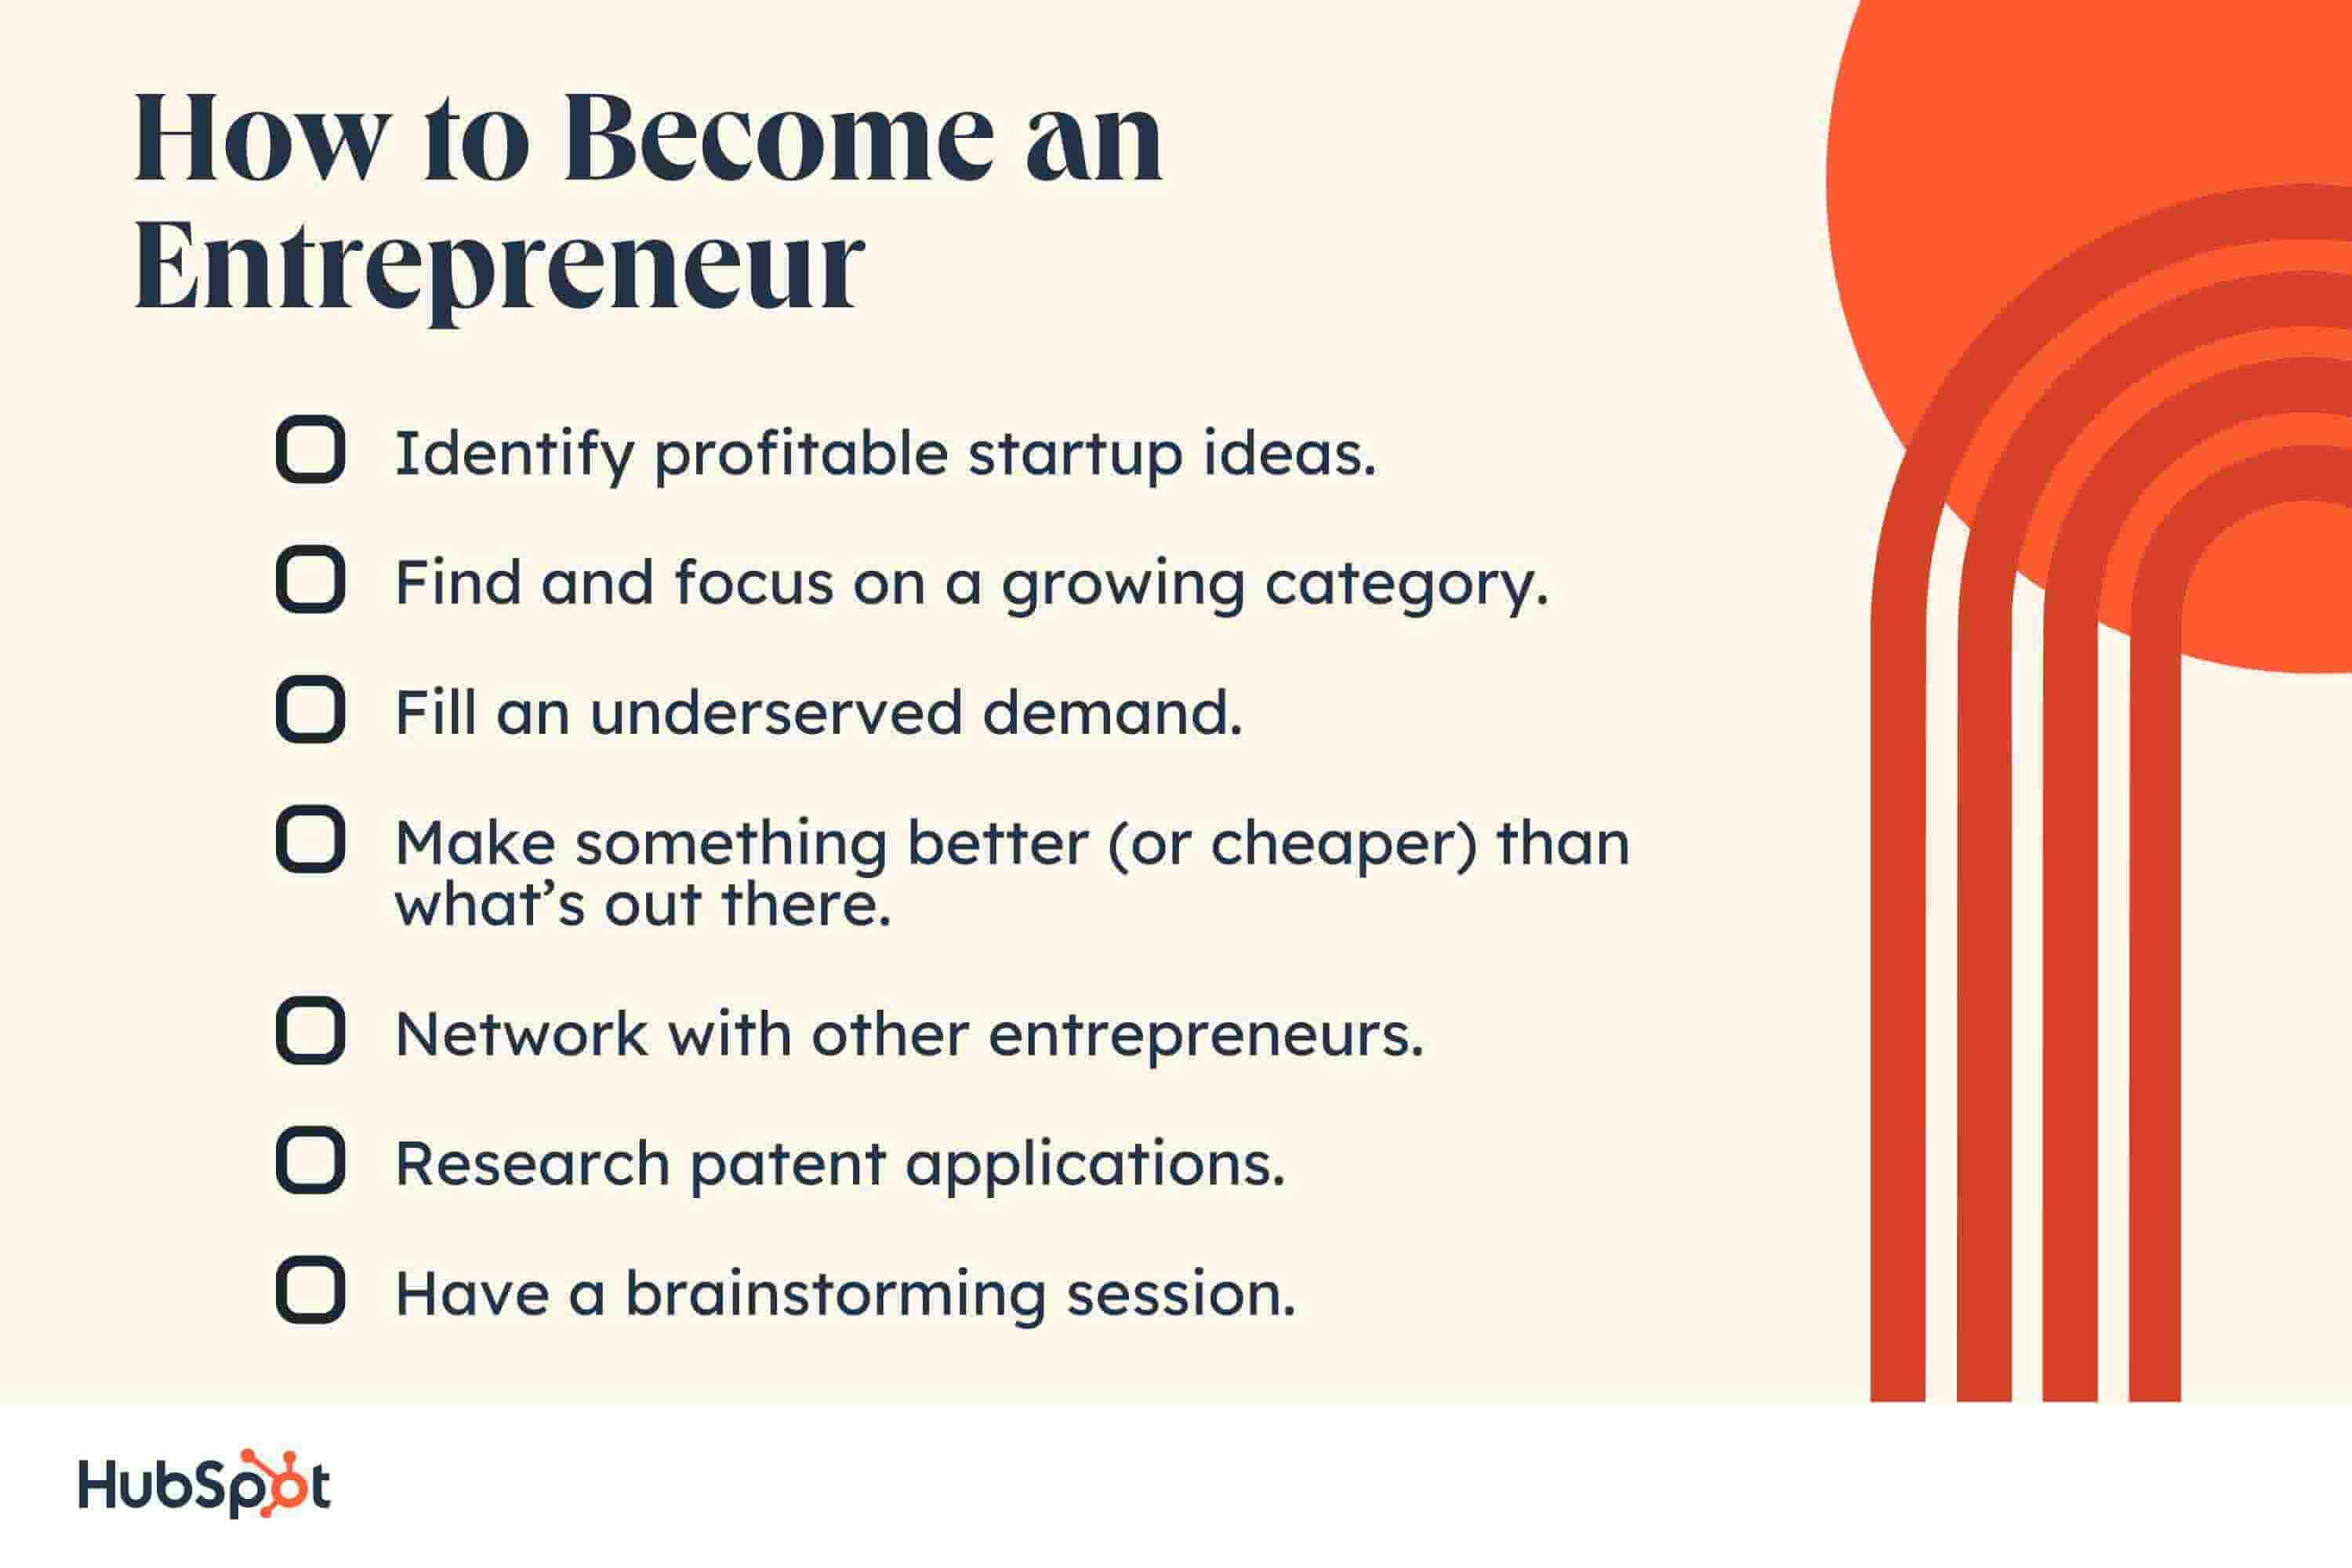 How to Get Funding to Start a Business Identify profitable startup ideas. Find and focus on a growing category. Fill an underserved demand. Make something better (or cheaper) than what’s out there. Network with other entrepreneurs. Research patent applications. Have a brainstorming session.